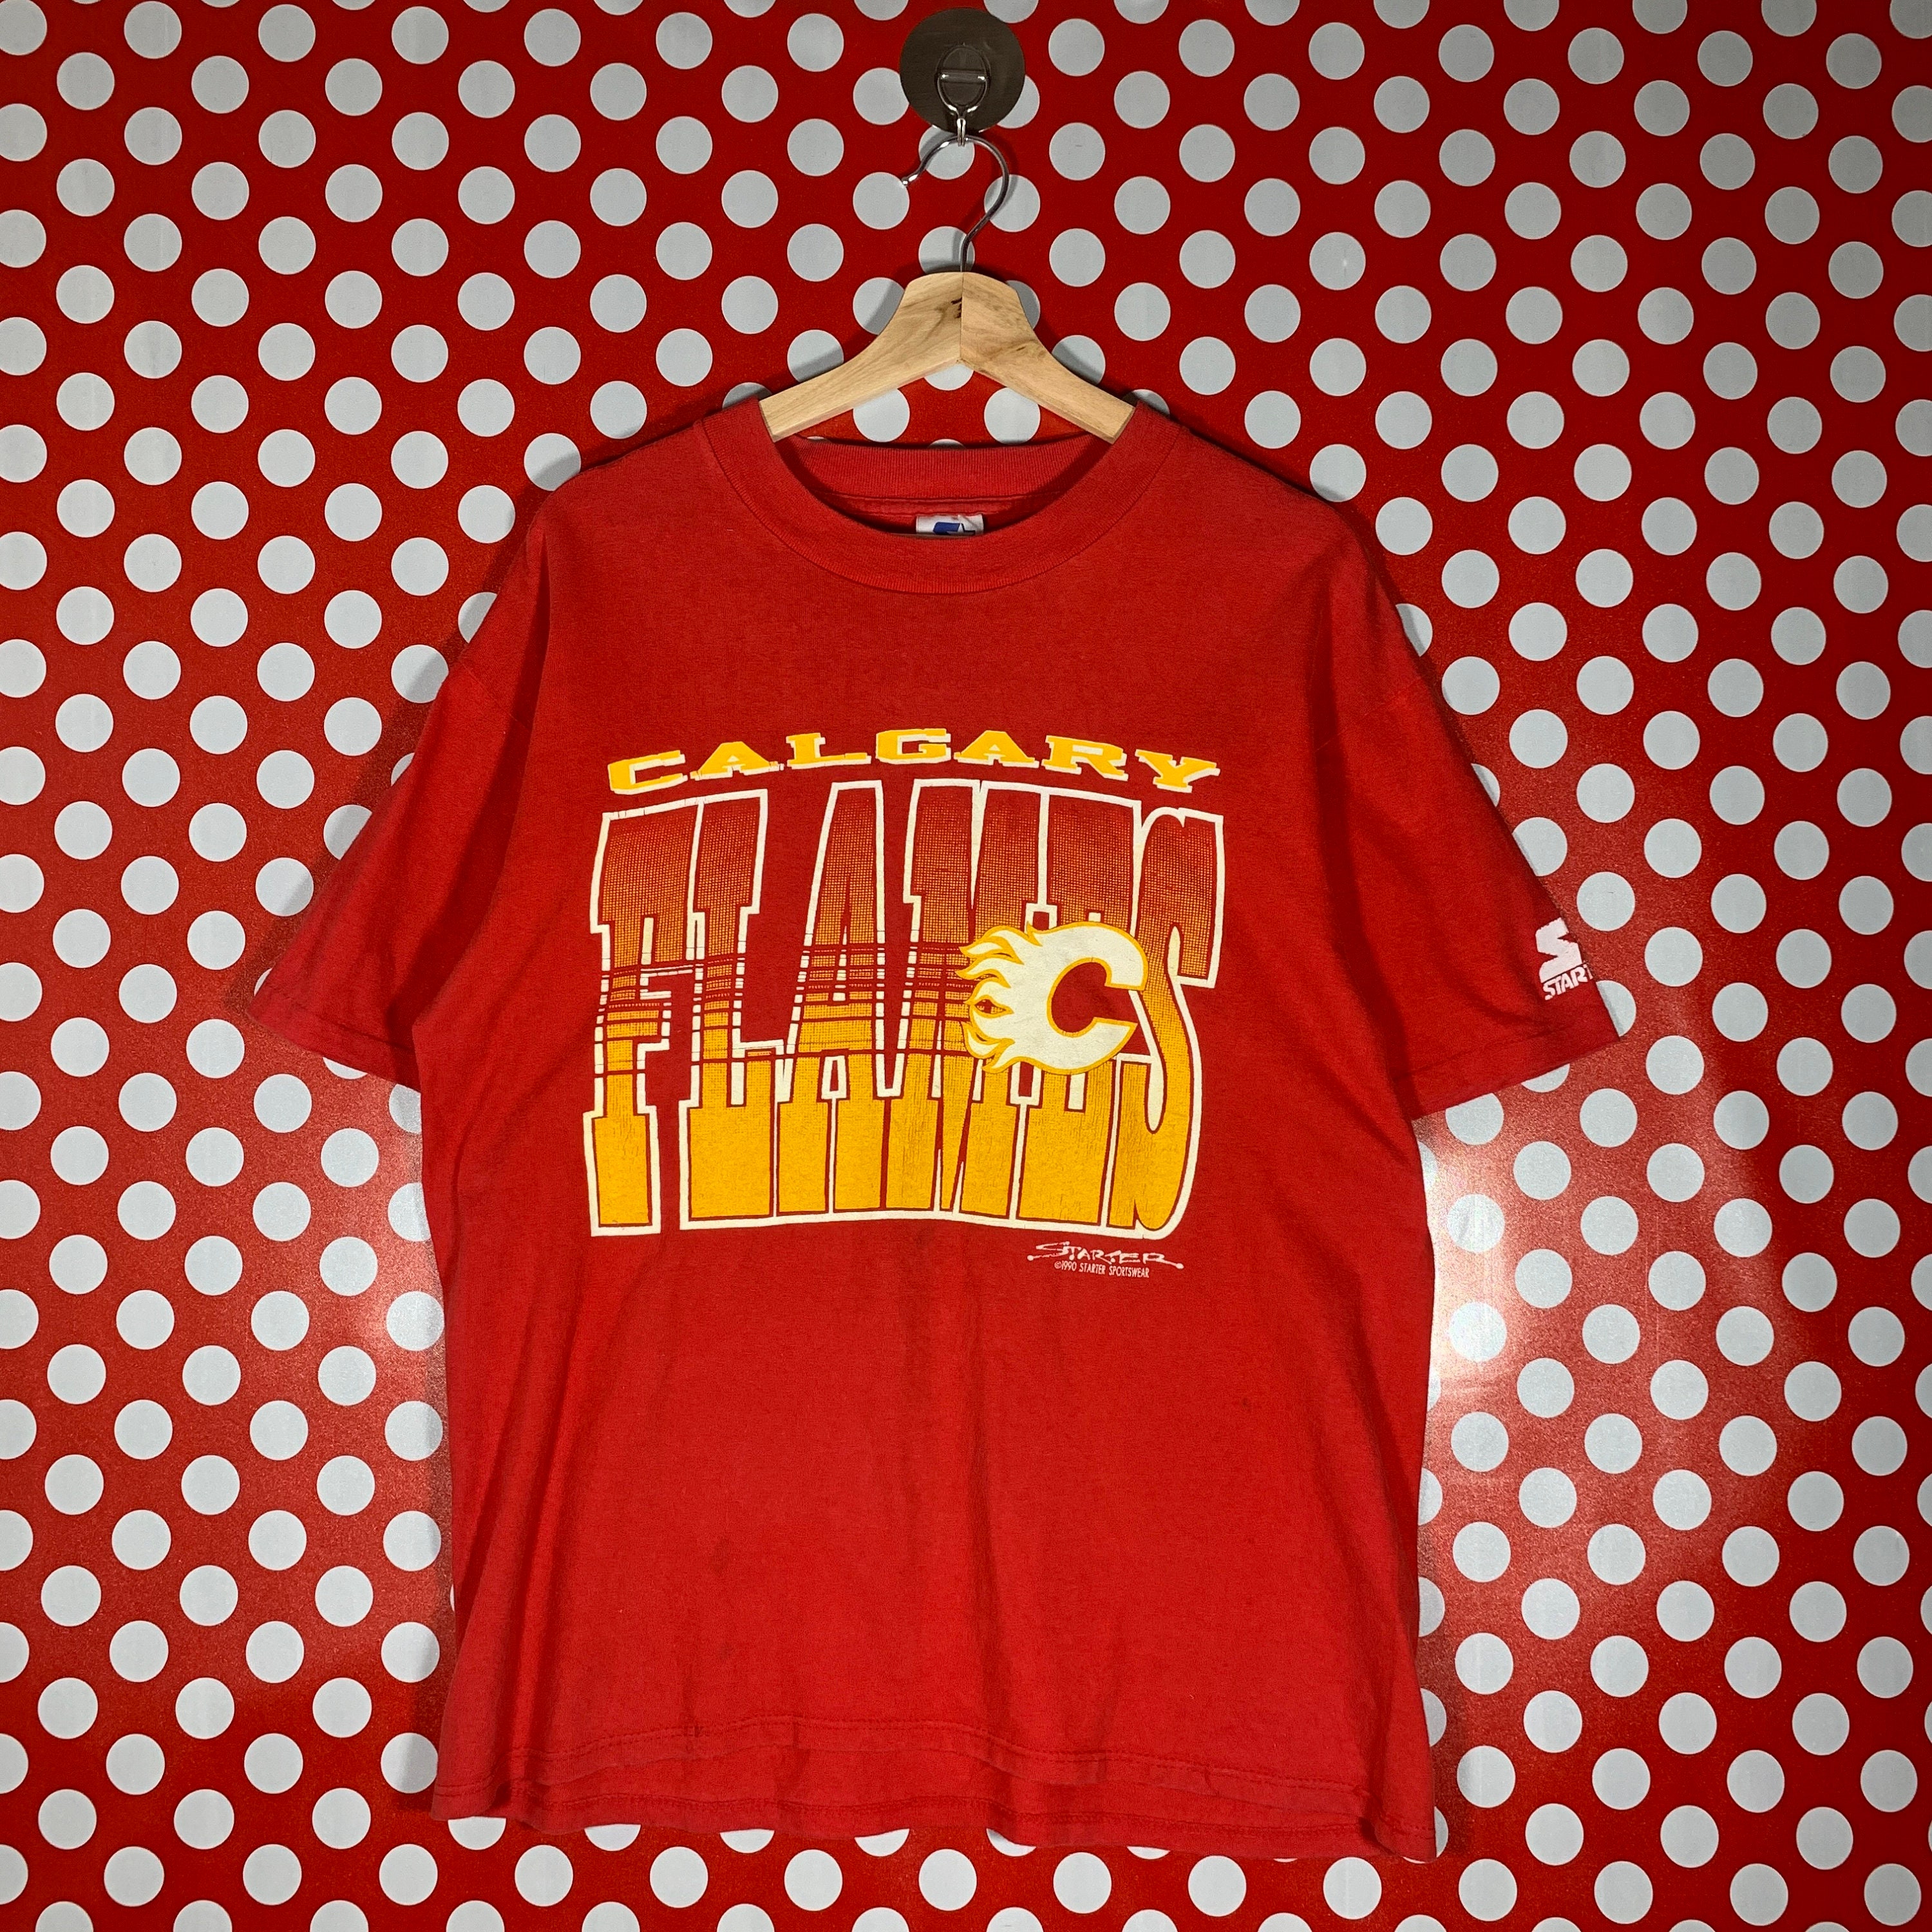 BackboardVintage Vintage / Calgary Flames T Shirt / 90s NHL Hockey / Stanley Cup / Canadian Team Promo Graphic T-Shirt